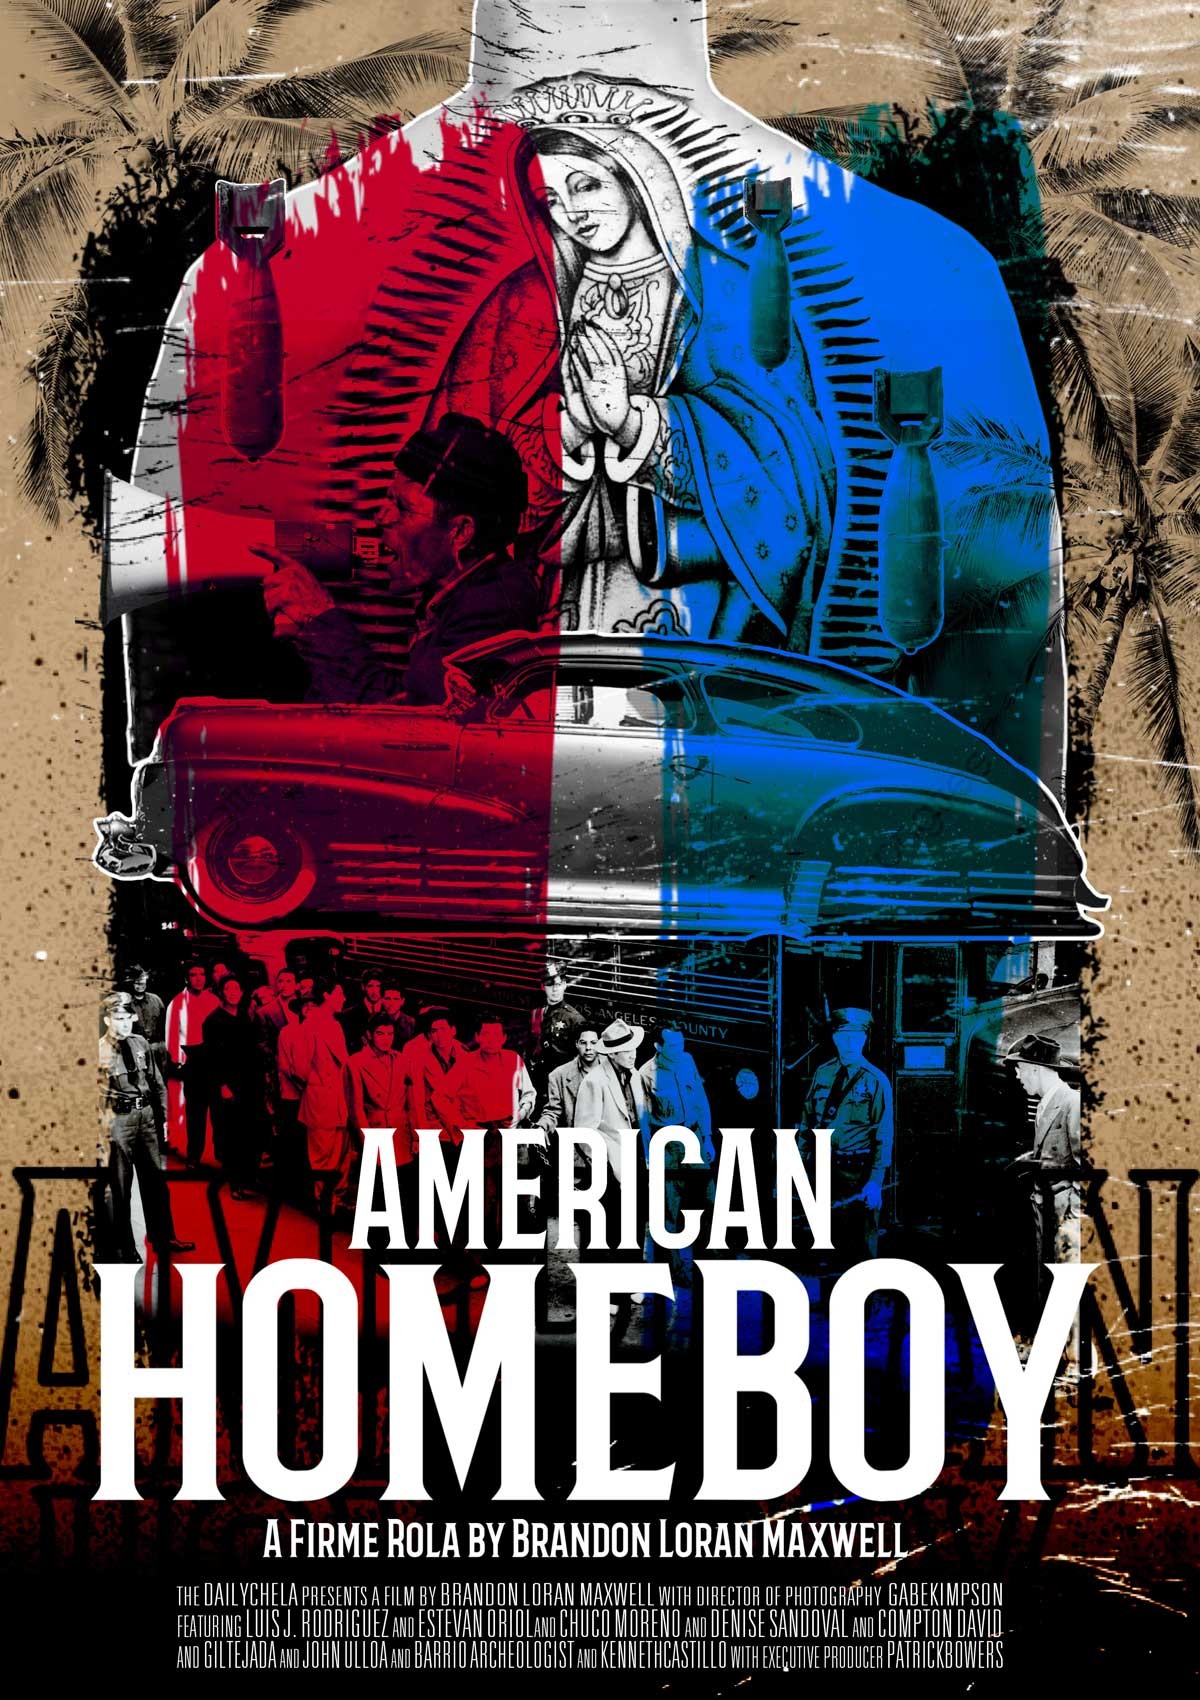 The poster for American Homeboy.